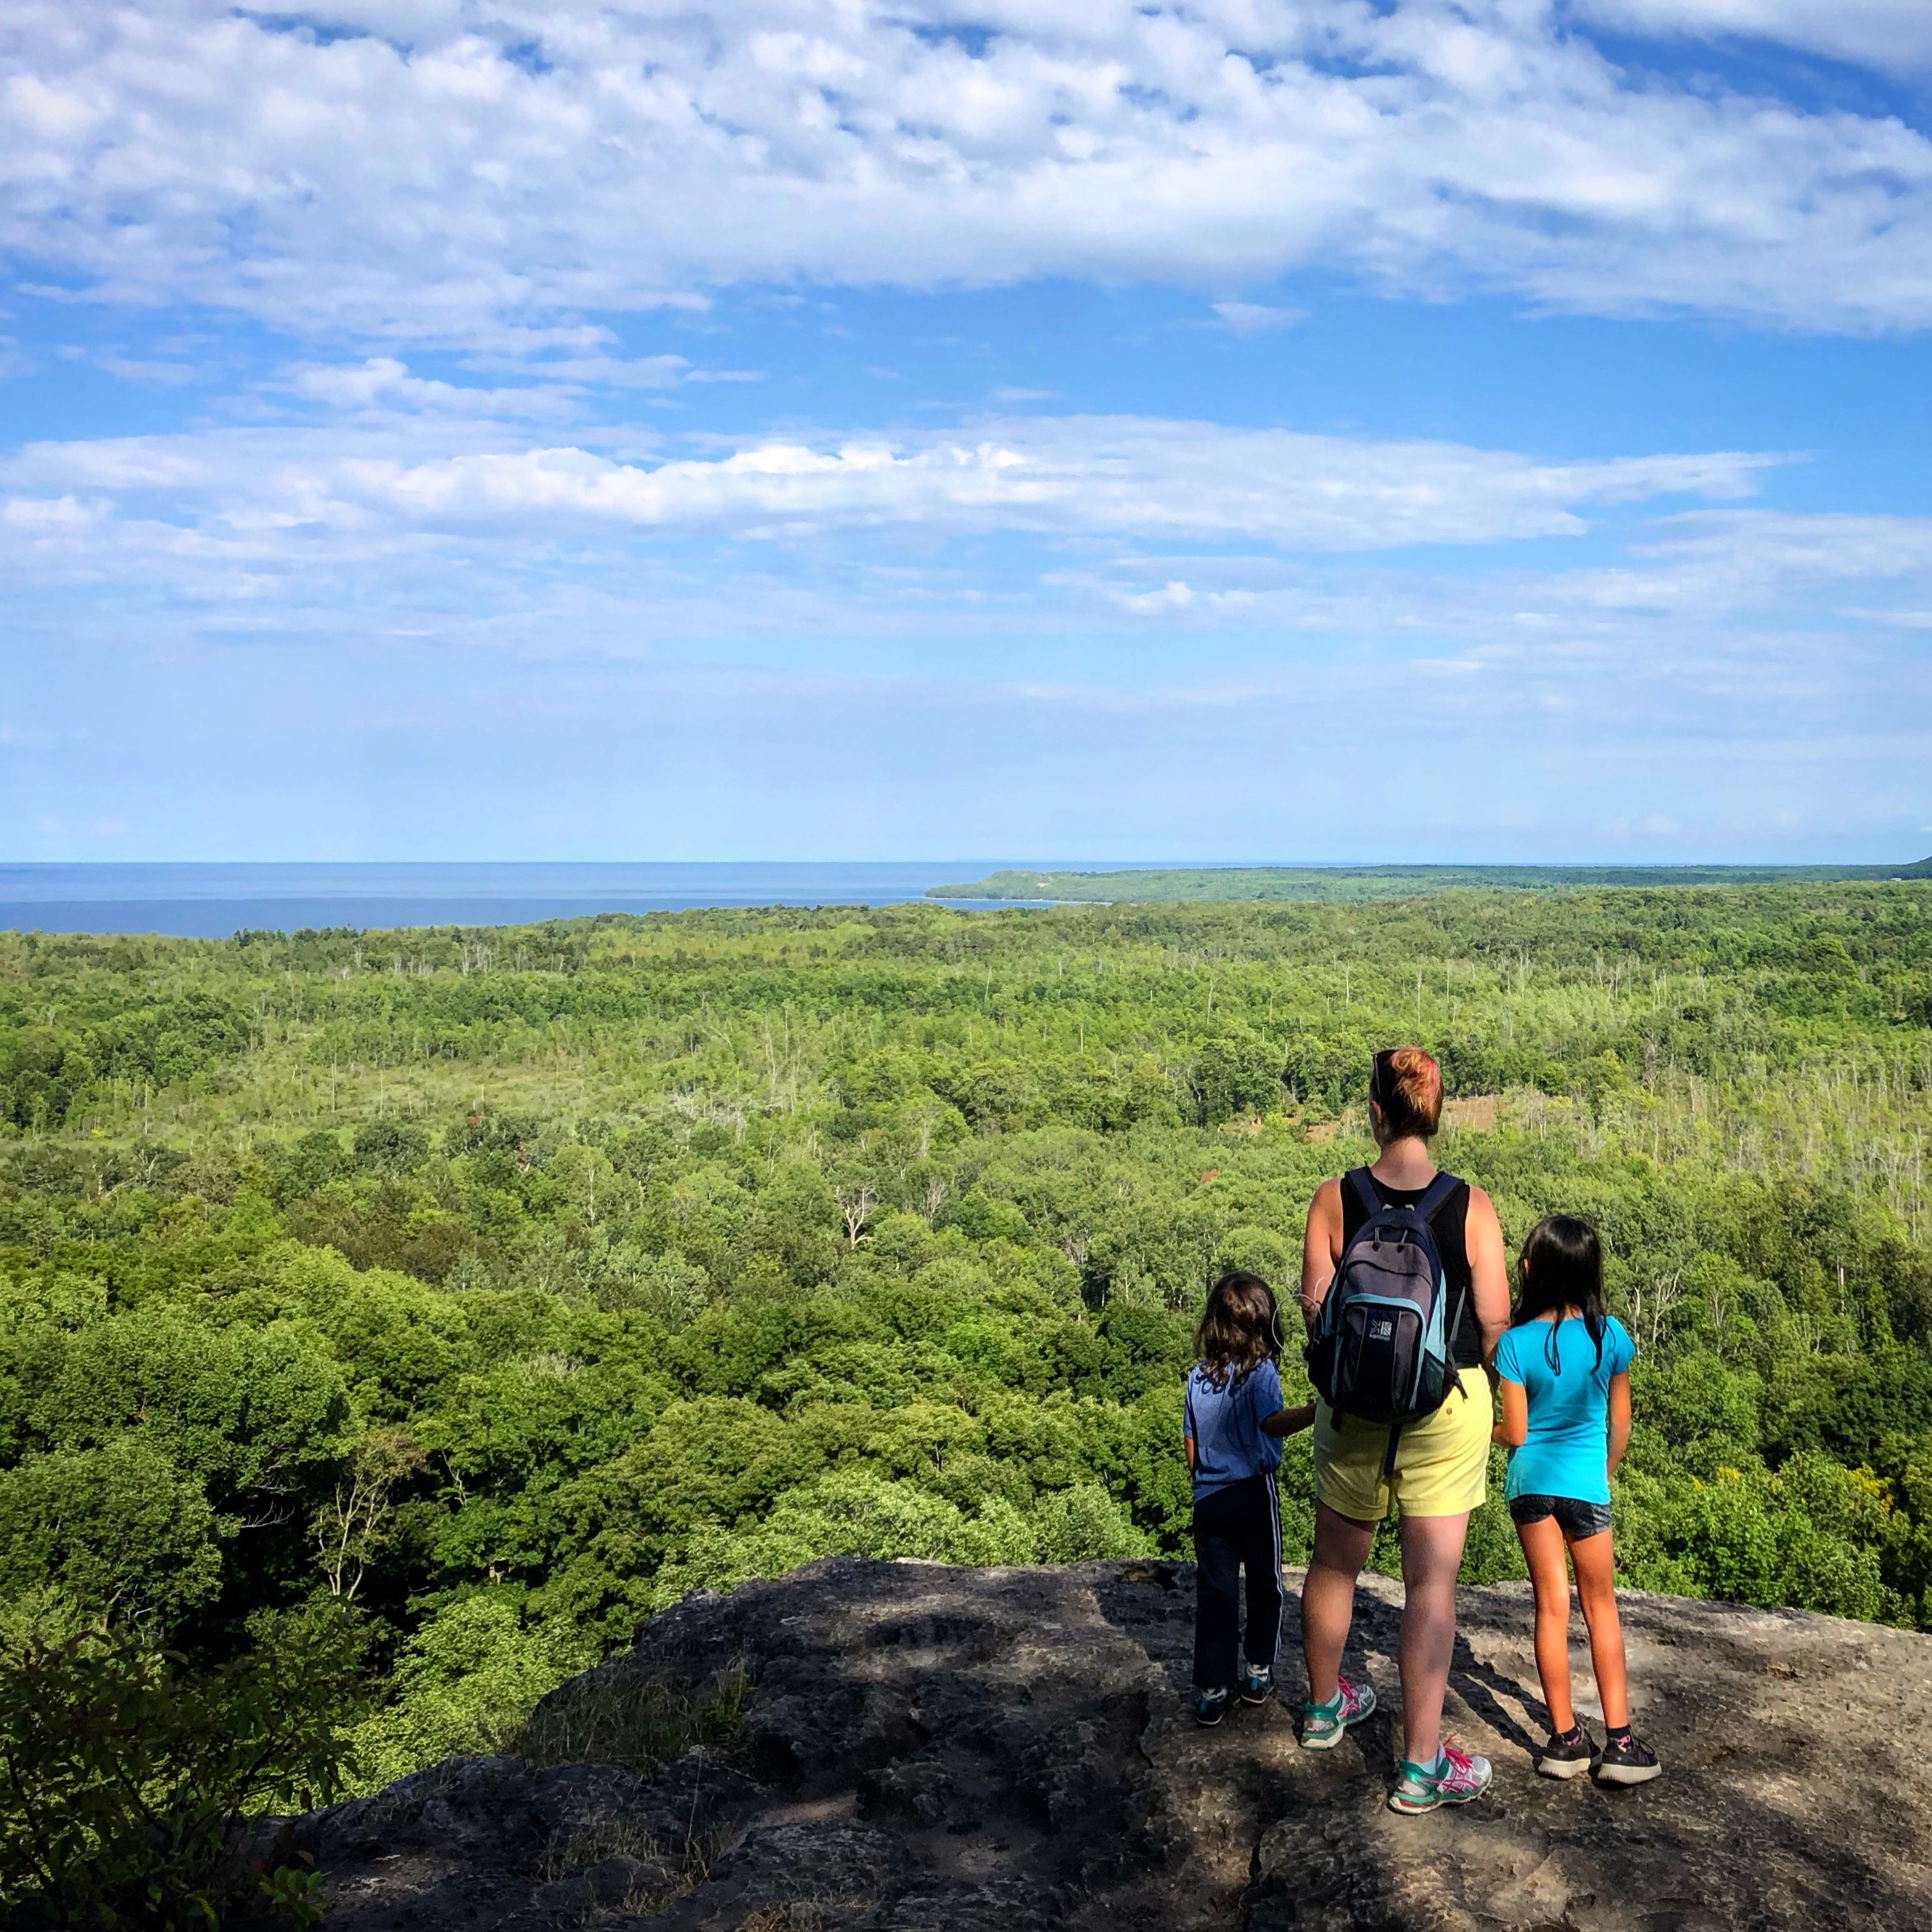 My and my kids on Skinner's Bluff look out #brucetrail #skinnersbluff #wiartonontario #epichikes #hikewithkids #takeyourkidseverywhere